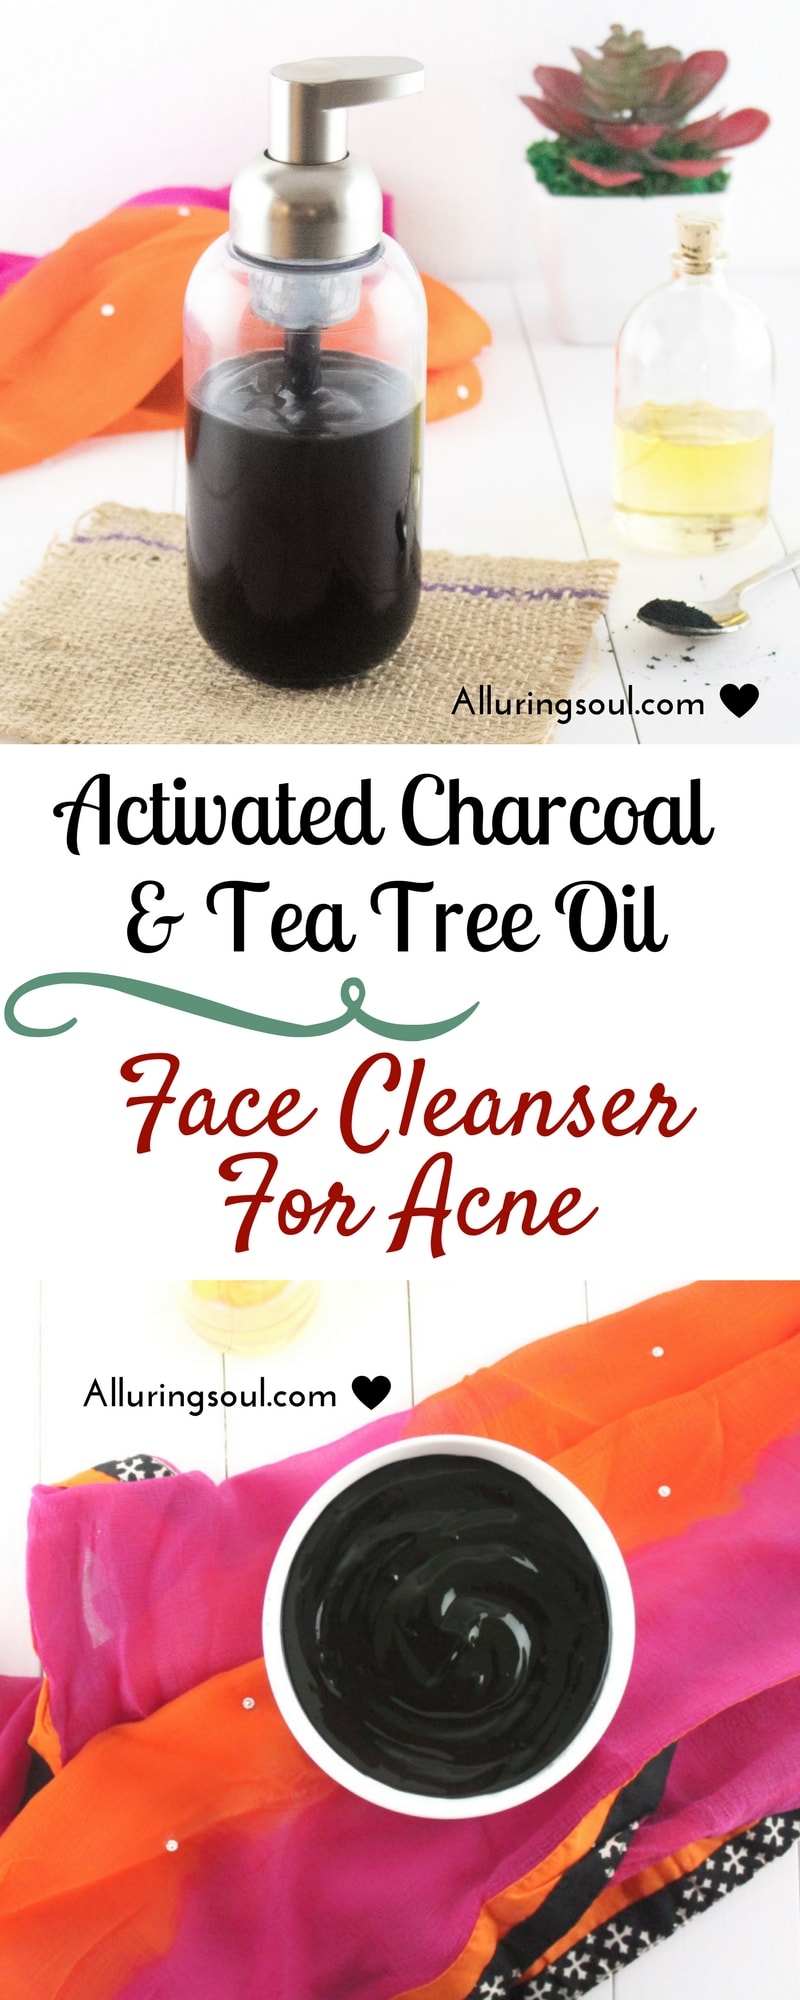 Activated Charcoal & Tea Tree Oil Face Cleanser For Acne